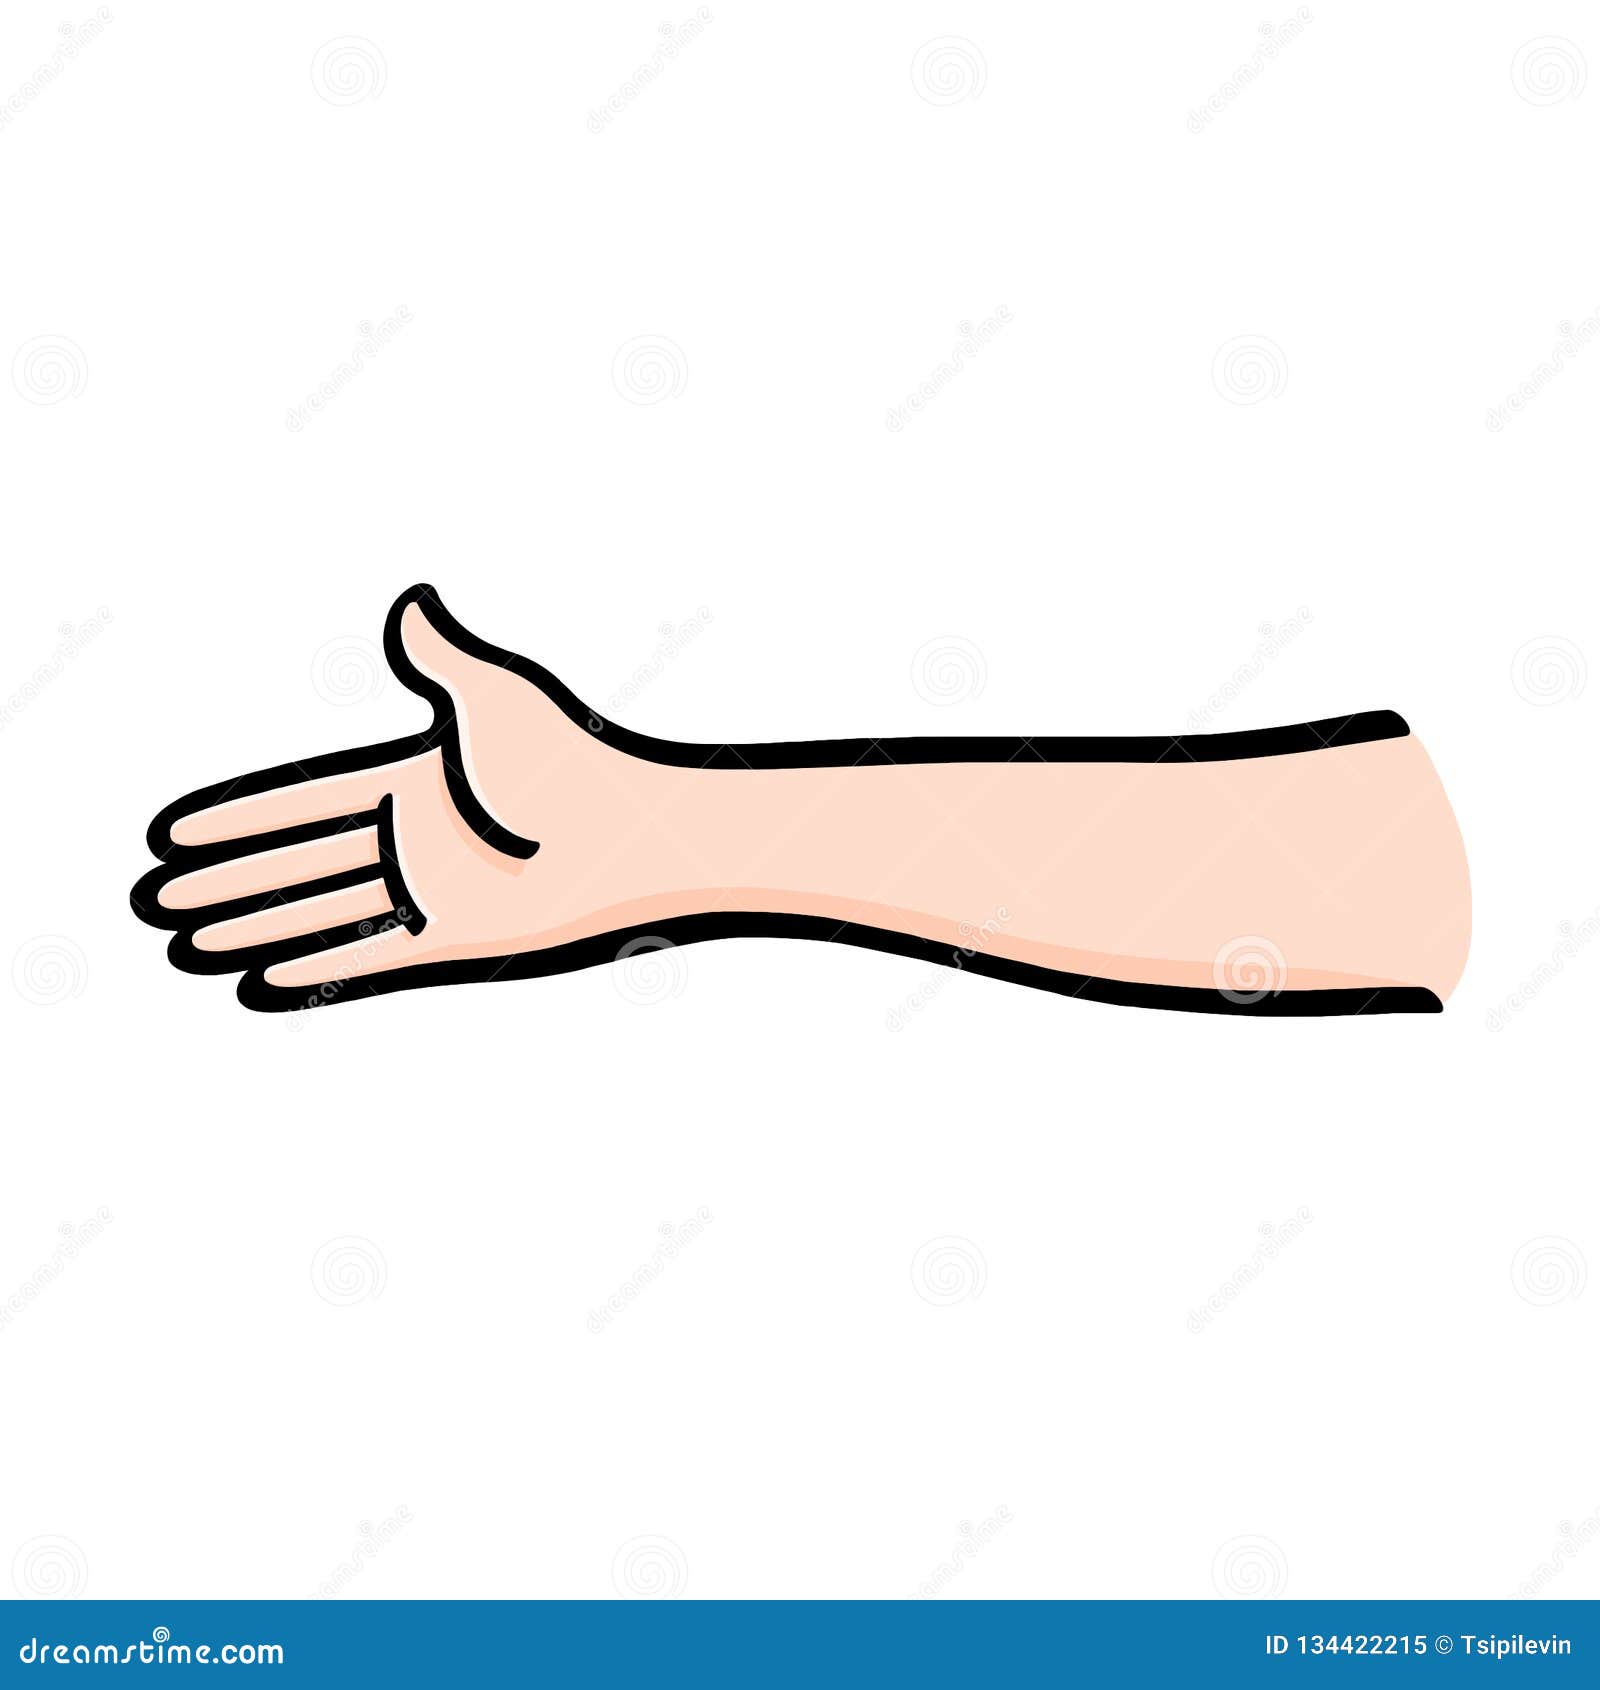 Gesture Hand Out Reaching Stock Illustrations 122 Gesture Hand Out Reaching Stock Illustrations Vectors Clipart Dreamstime